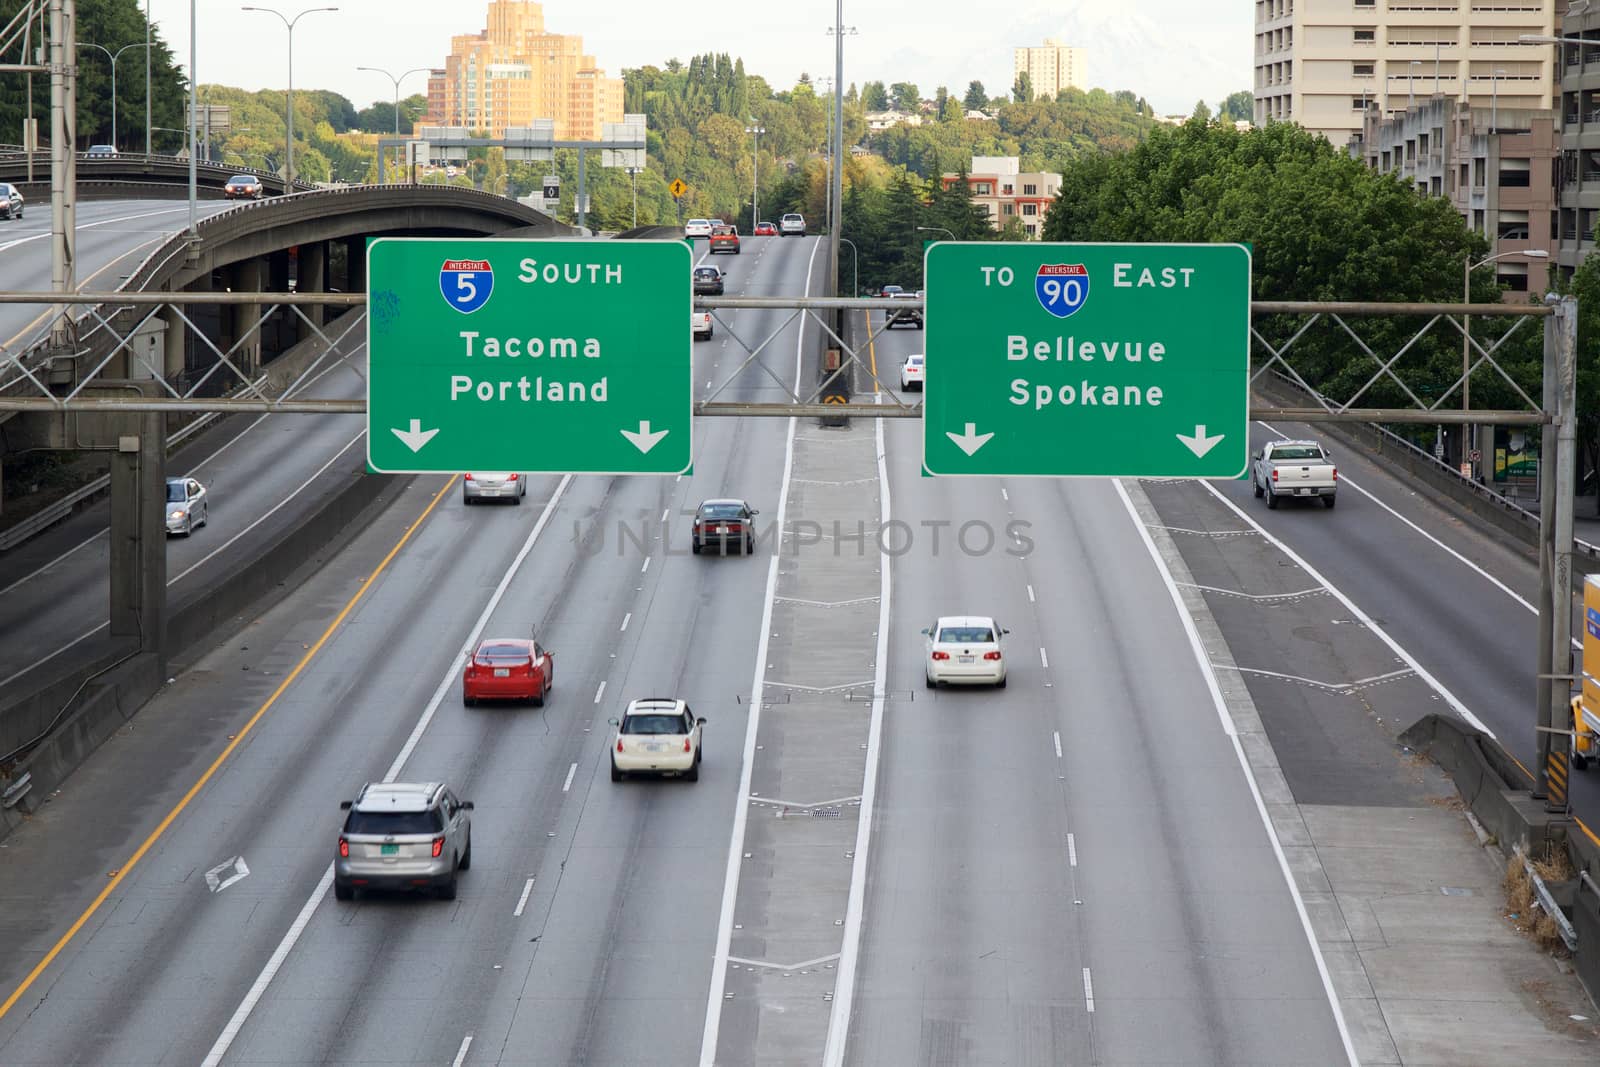 Seattle, WA - July 24, 2015 - View of I5 South with the Tacoma, Portland, Bellevue and Spokane directional sign